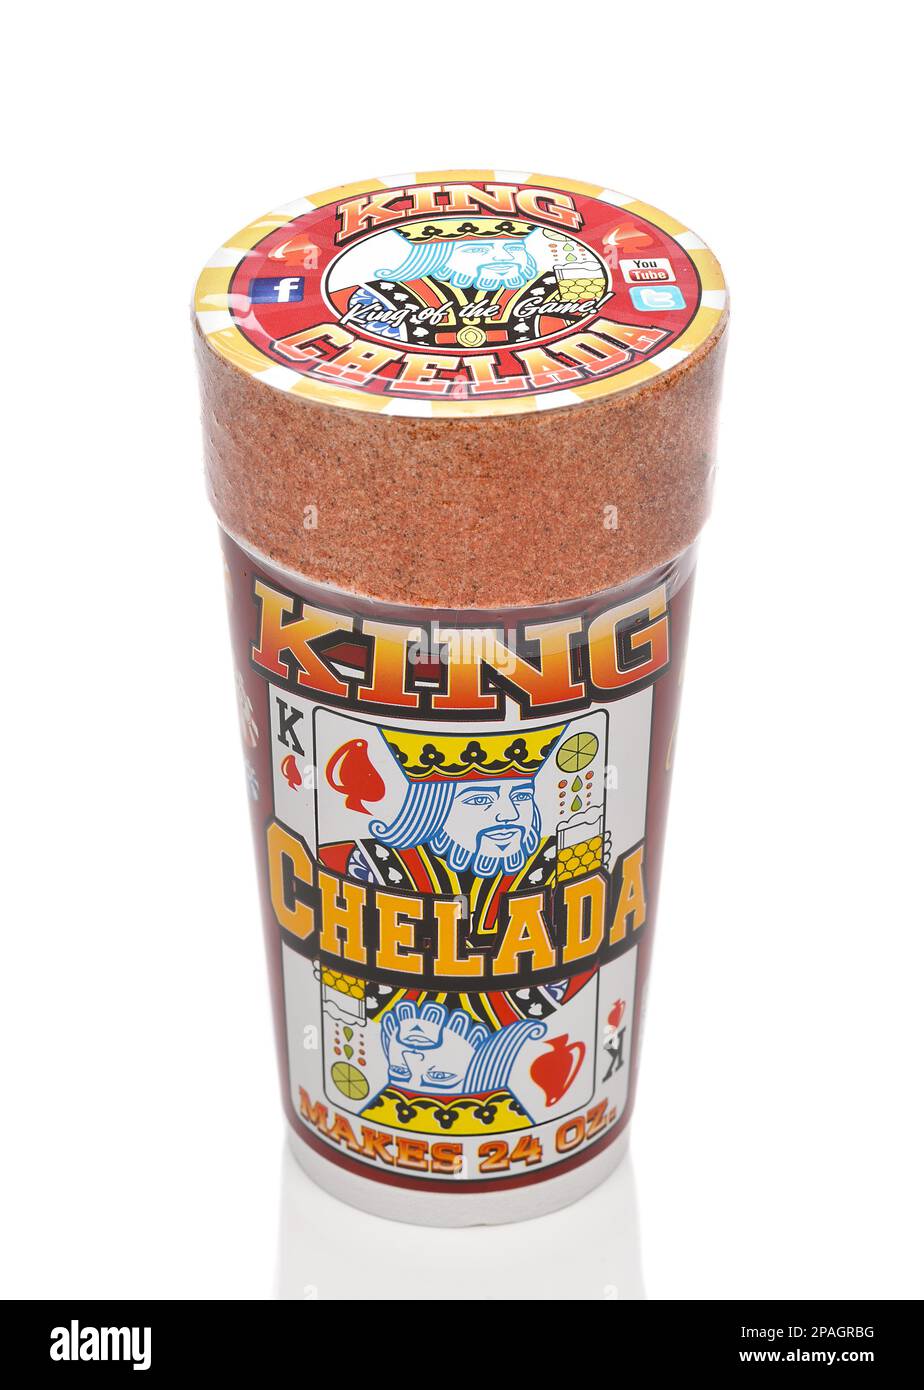 IRVINE, CALIFORNIA - 11 MAR 2023: King Chelada contains michelada spices for use in the preparation of beer-based beverages. Stock Photo